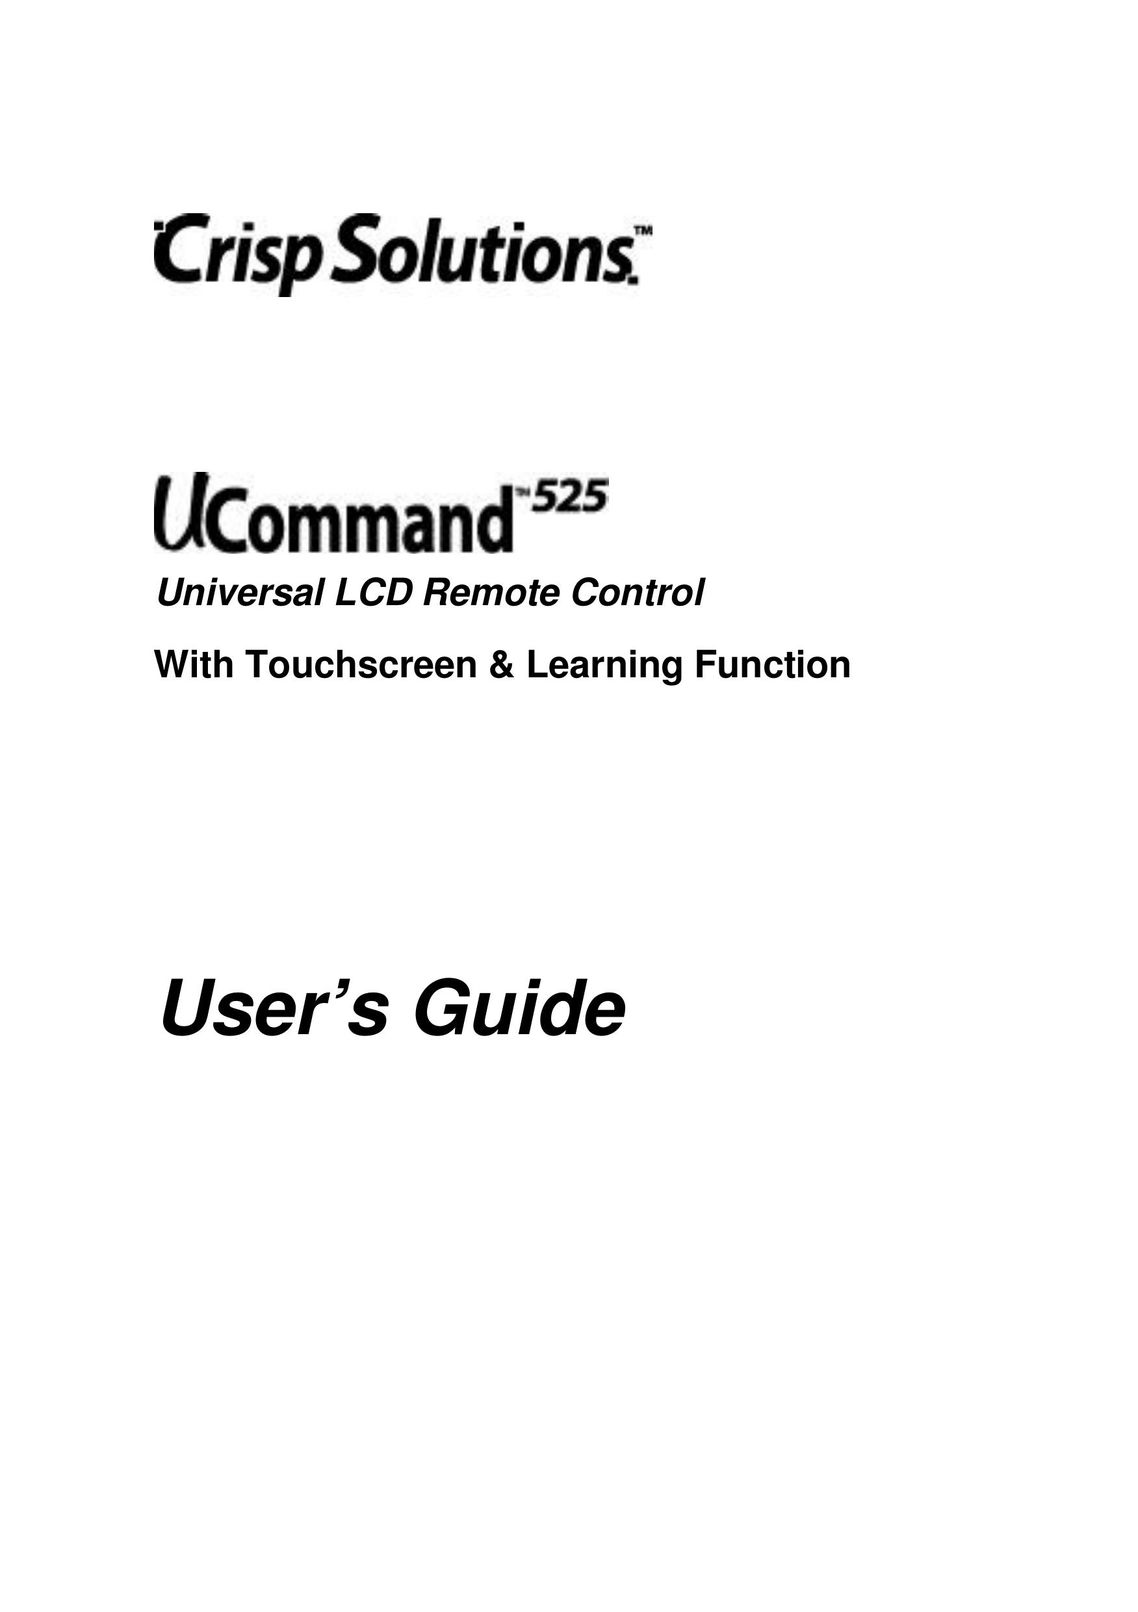 Crisp Solutions UCommand-525 Universal Remote User Manual